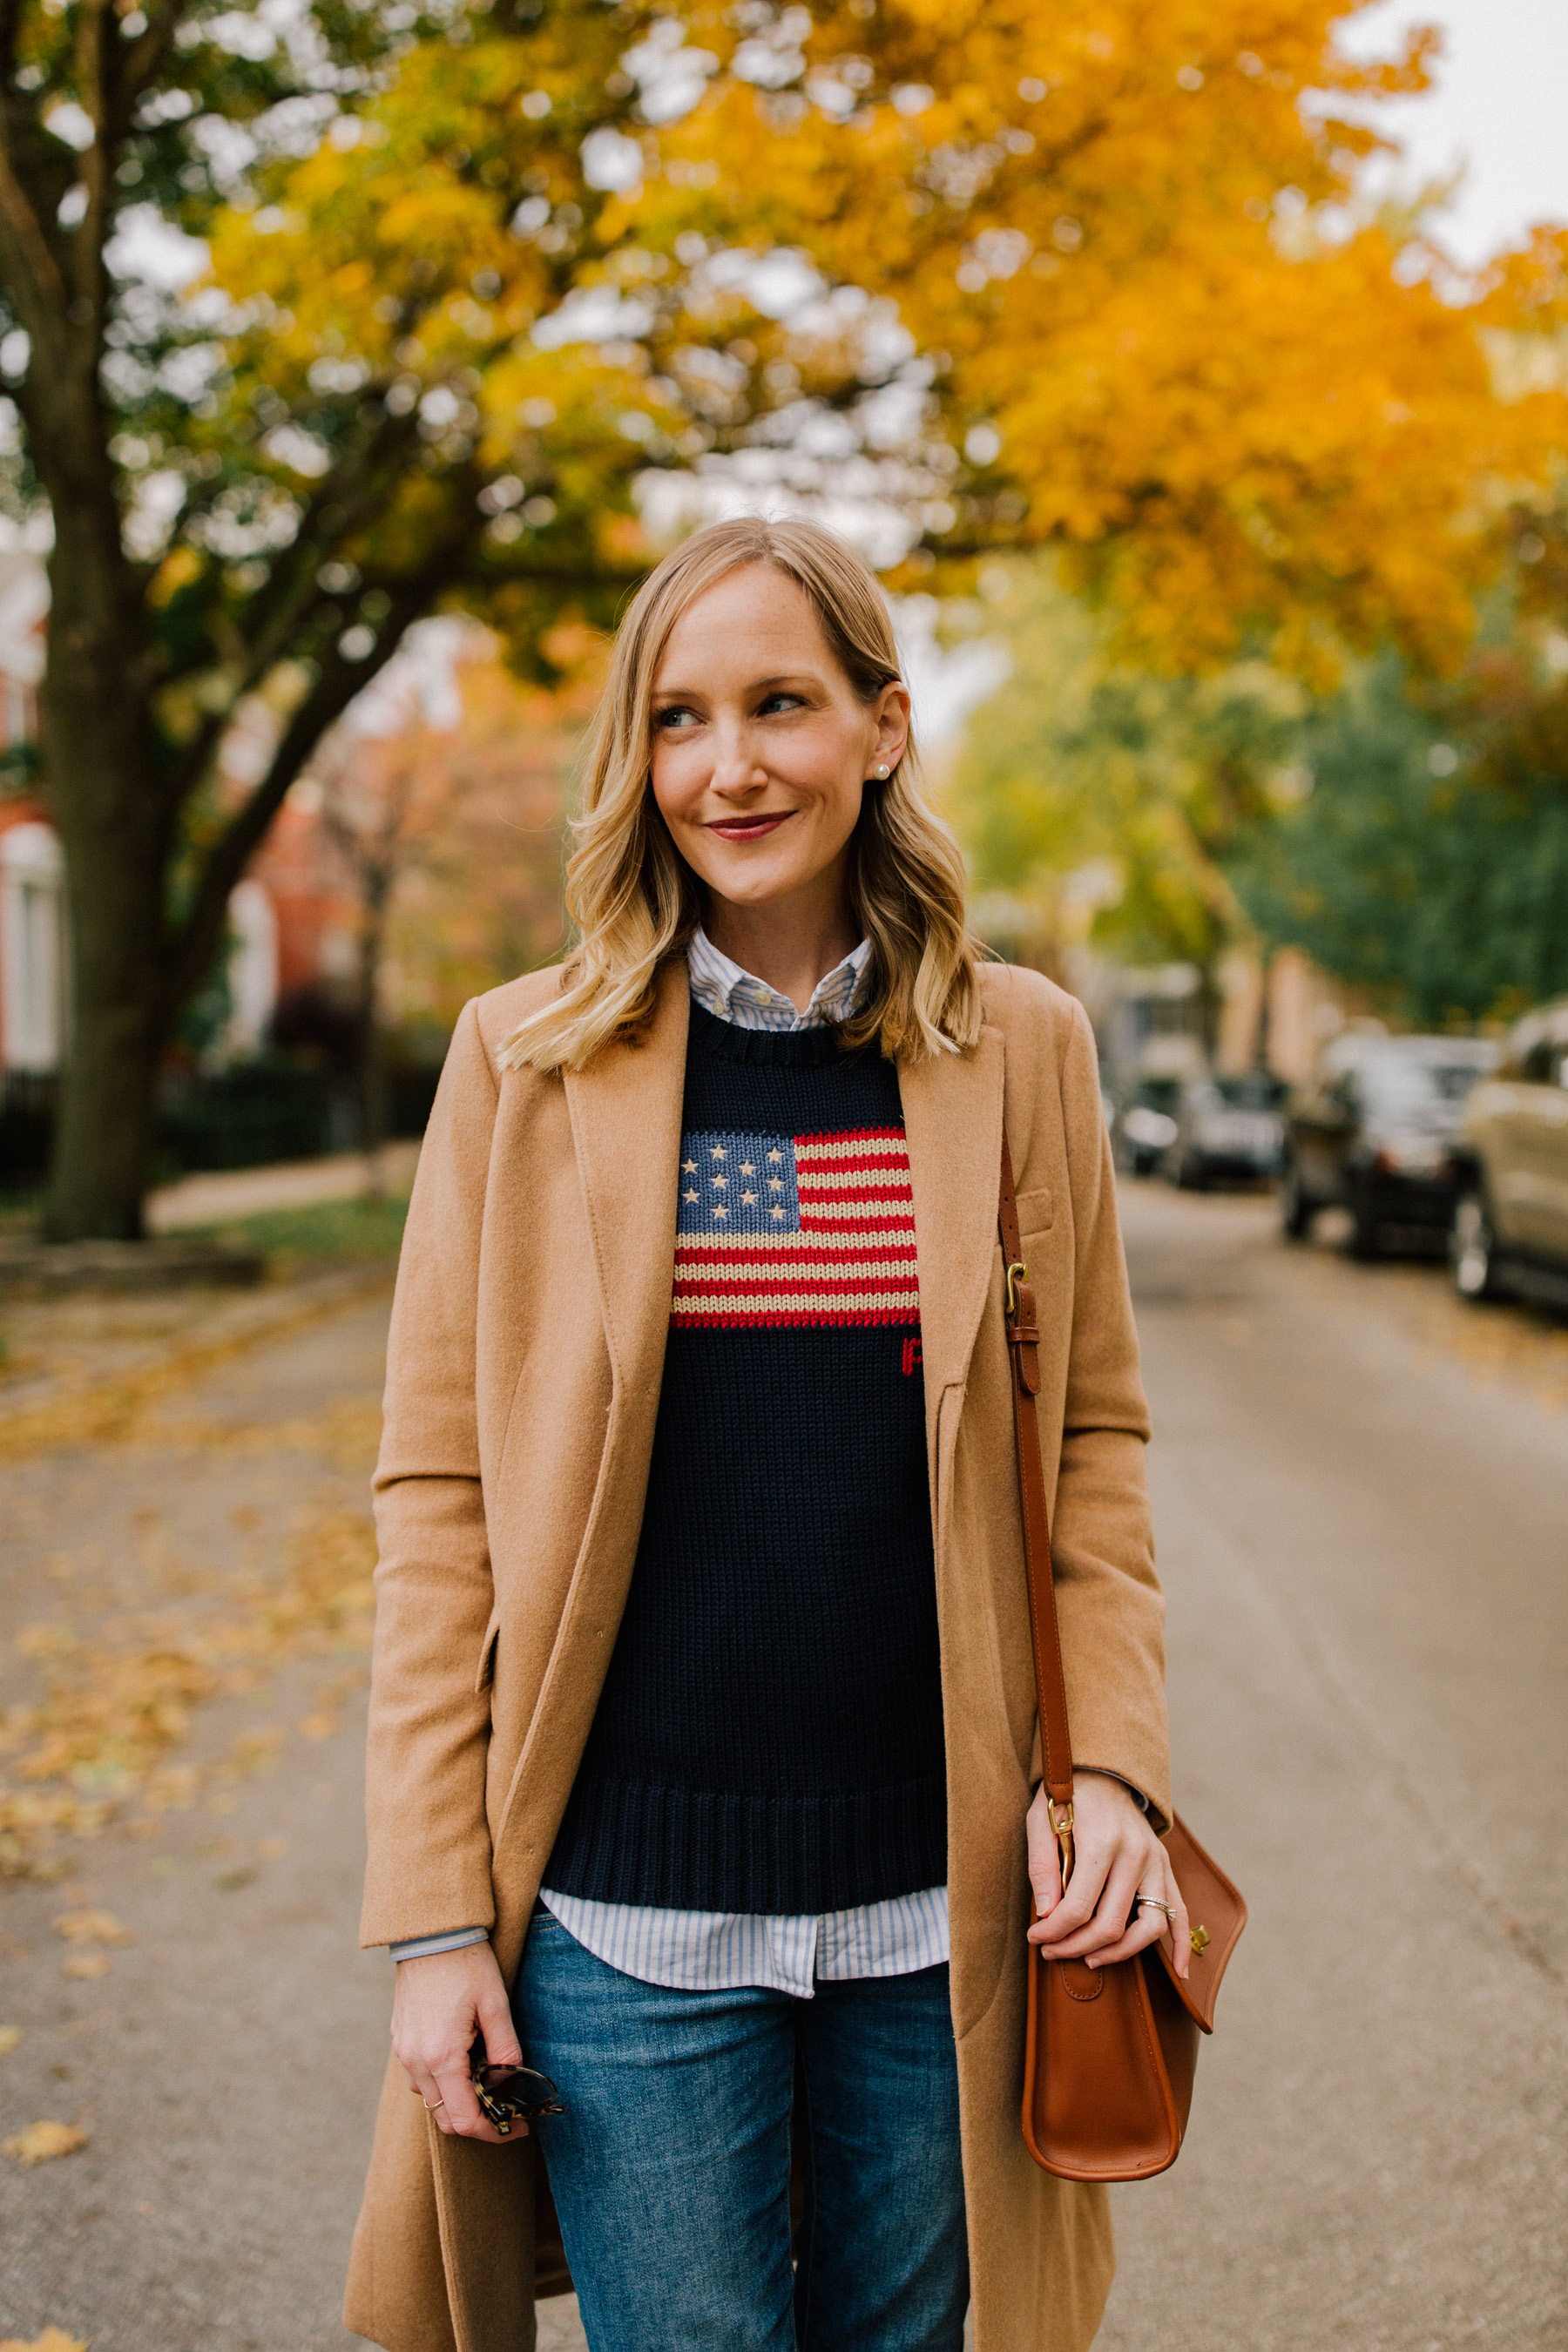 On Kelly: Ralph Lauren American Flag Sweater, Camel Coat, Striped Button Down